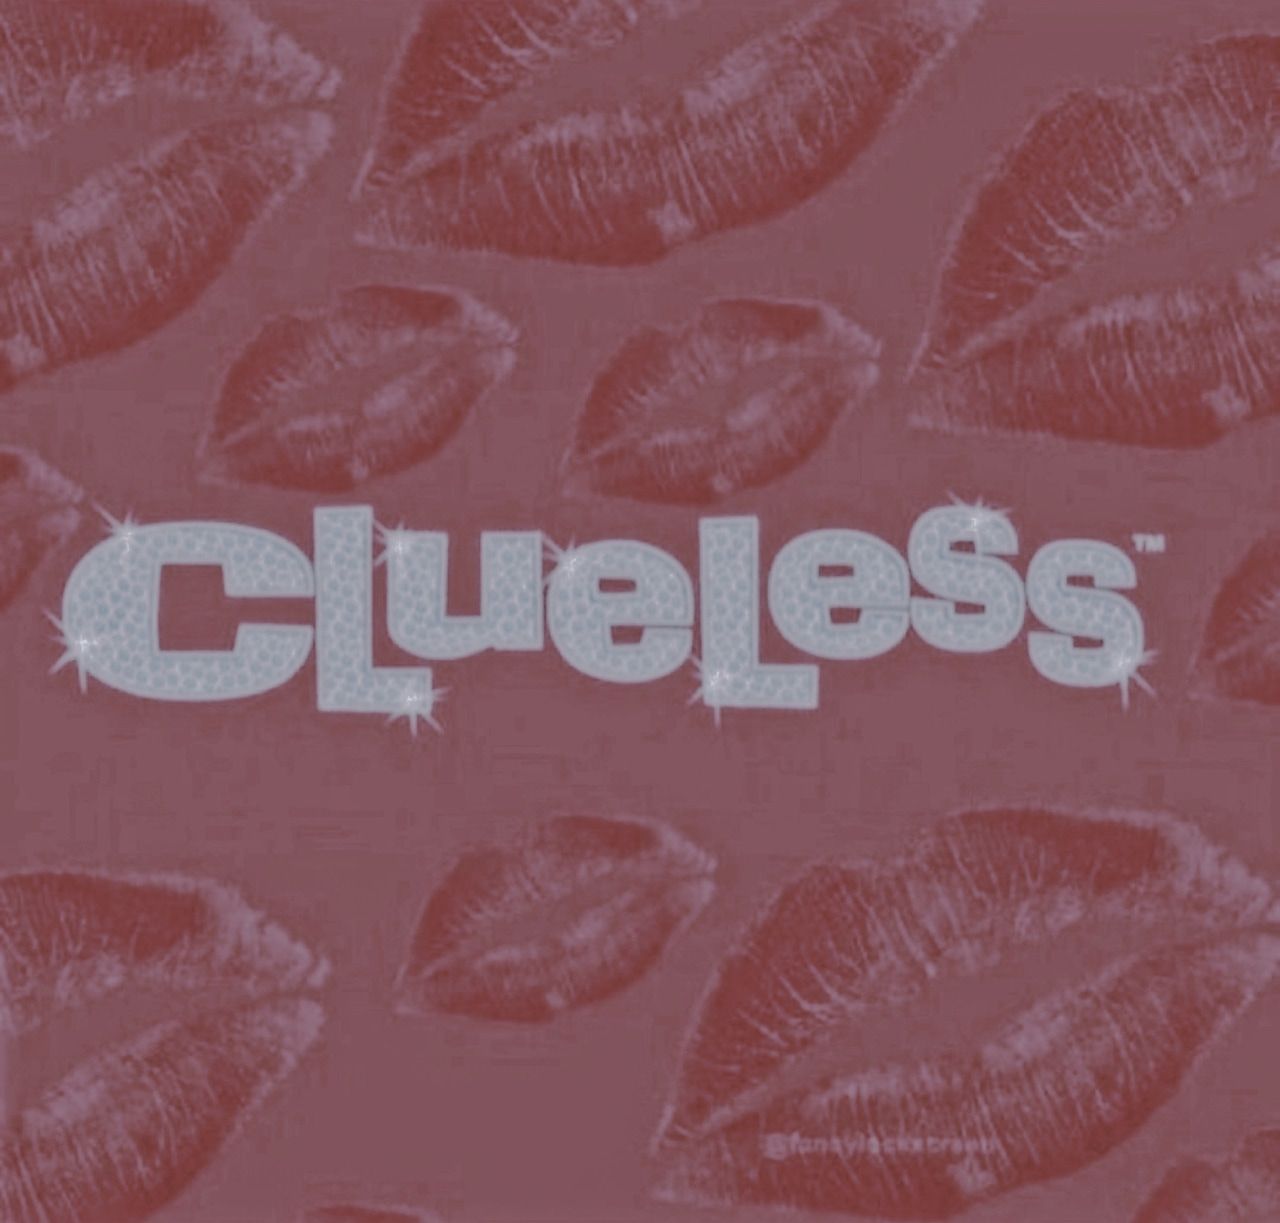 image about C L U E L E S S. See more about Clueless, 90s and movie